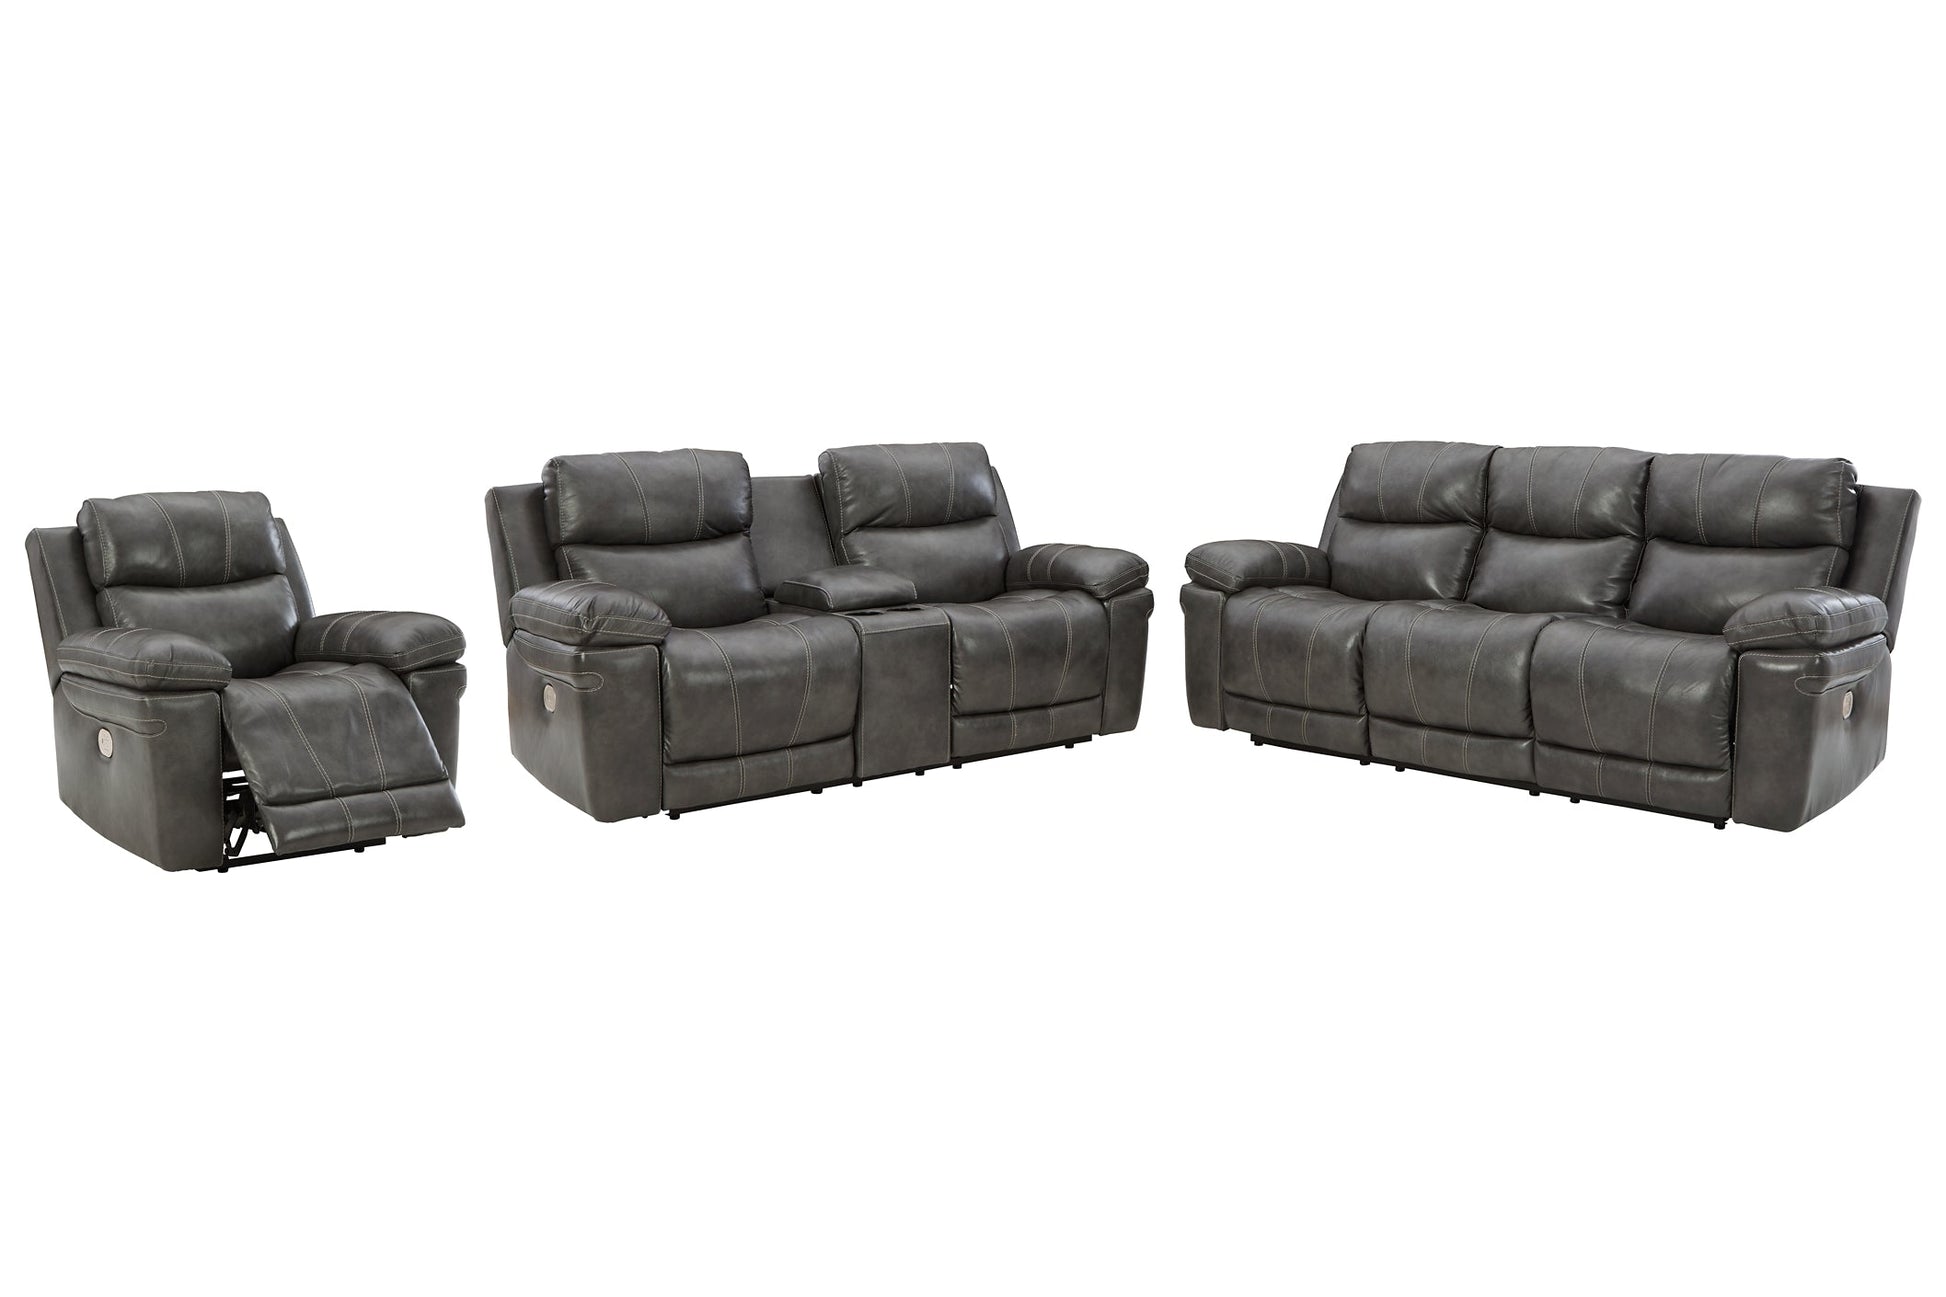 Edmar Sofa, Loveseat and Recliner at Walker Mattress and Furniture Locations in Cedar Park and Belton TX.